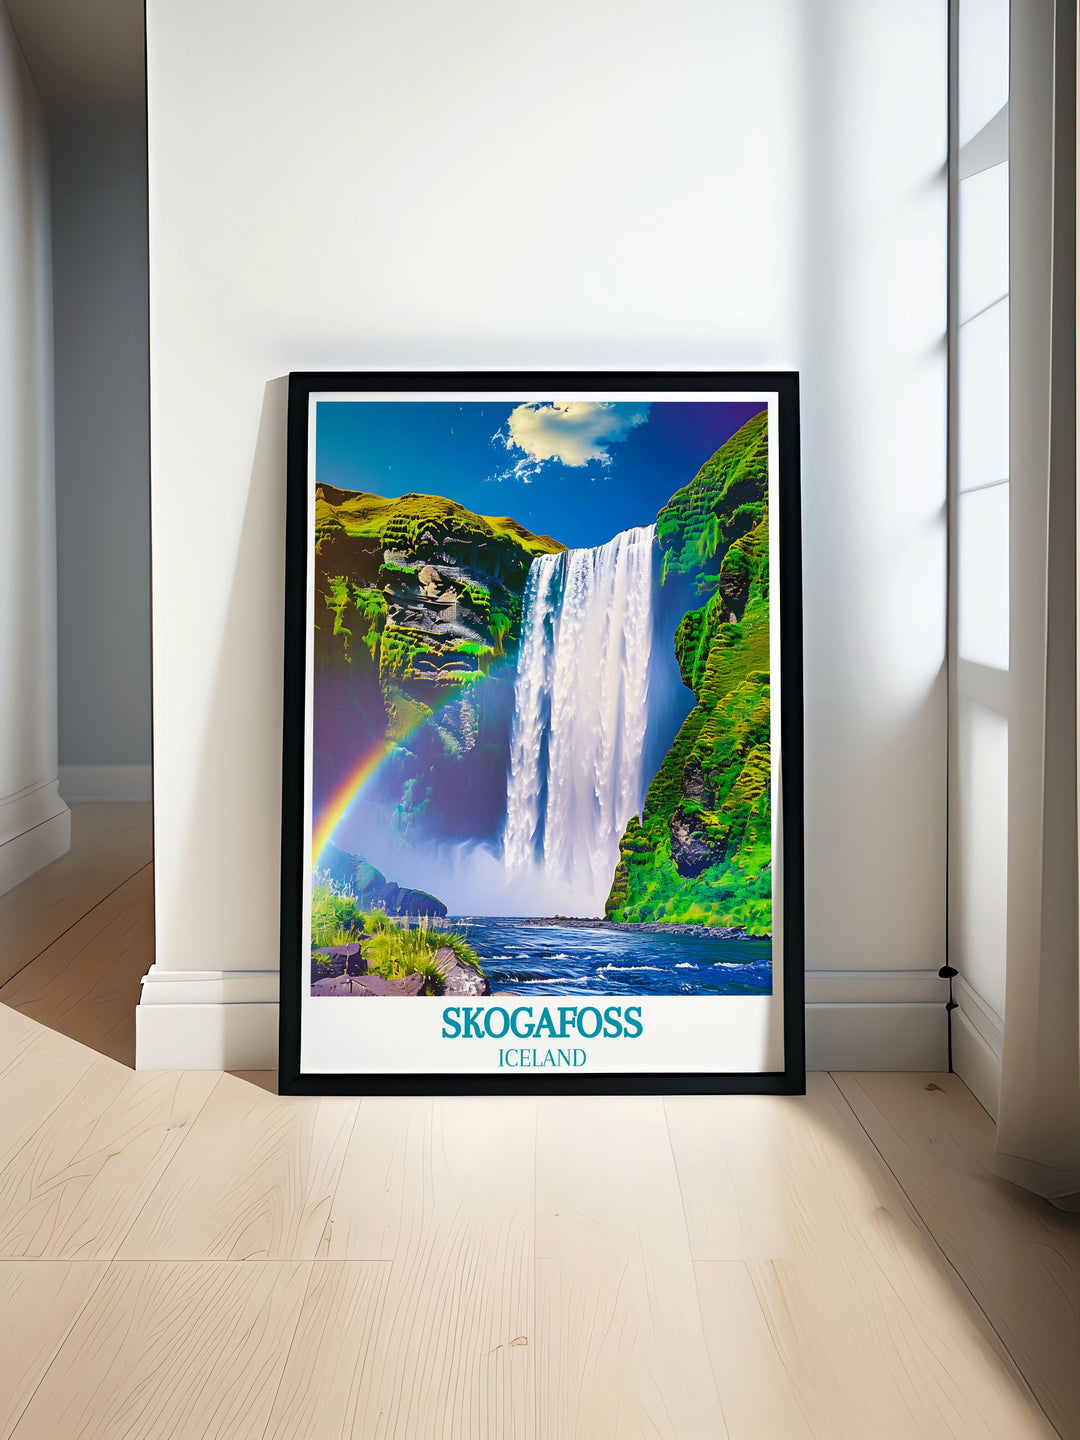 Immerse yourself in the stunning scenery of Skogafoss with this travel poster, featuring the dramatic waterfall and the vibrant arc created by its mist.